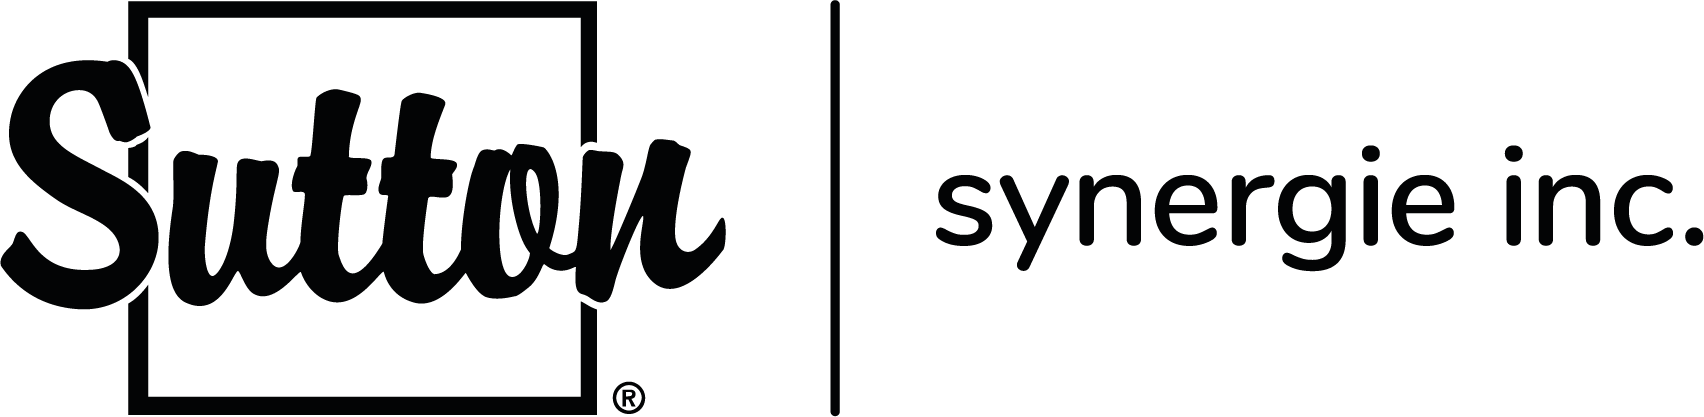 Logo groupe sutton - synergie inc. agence immobilière